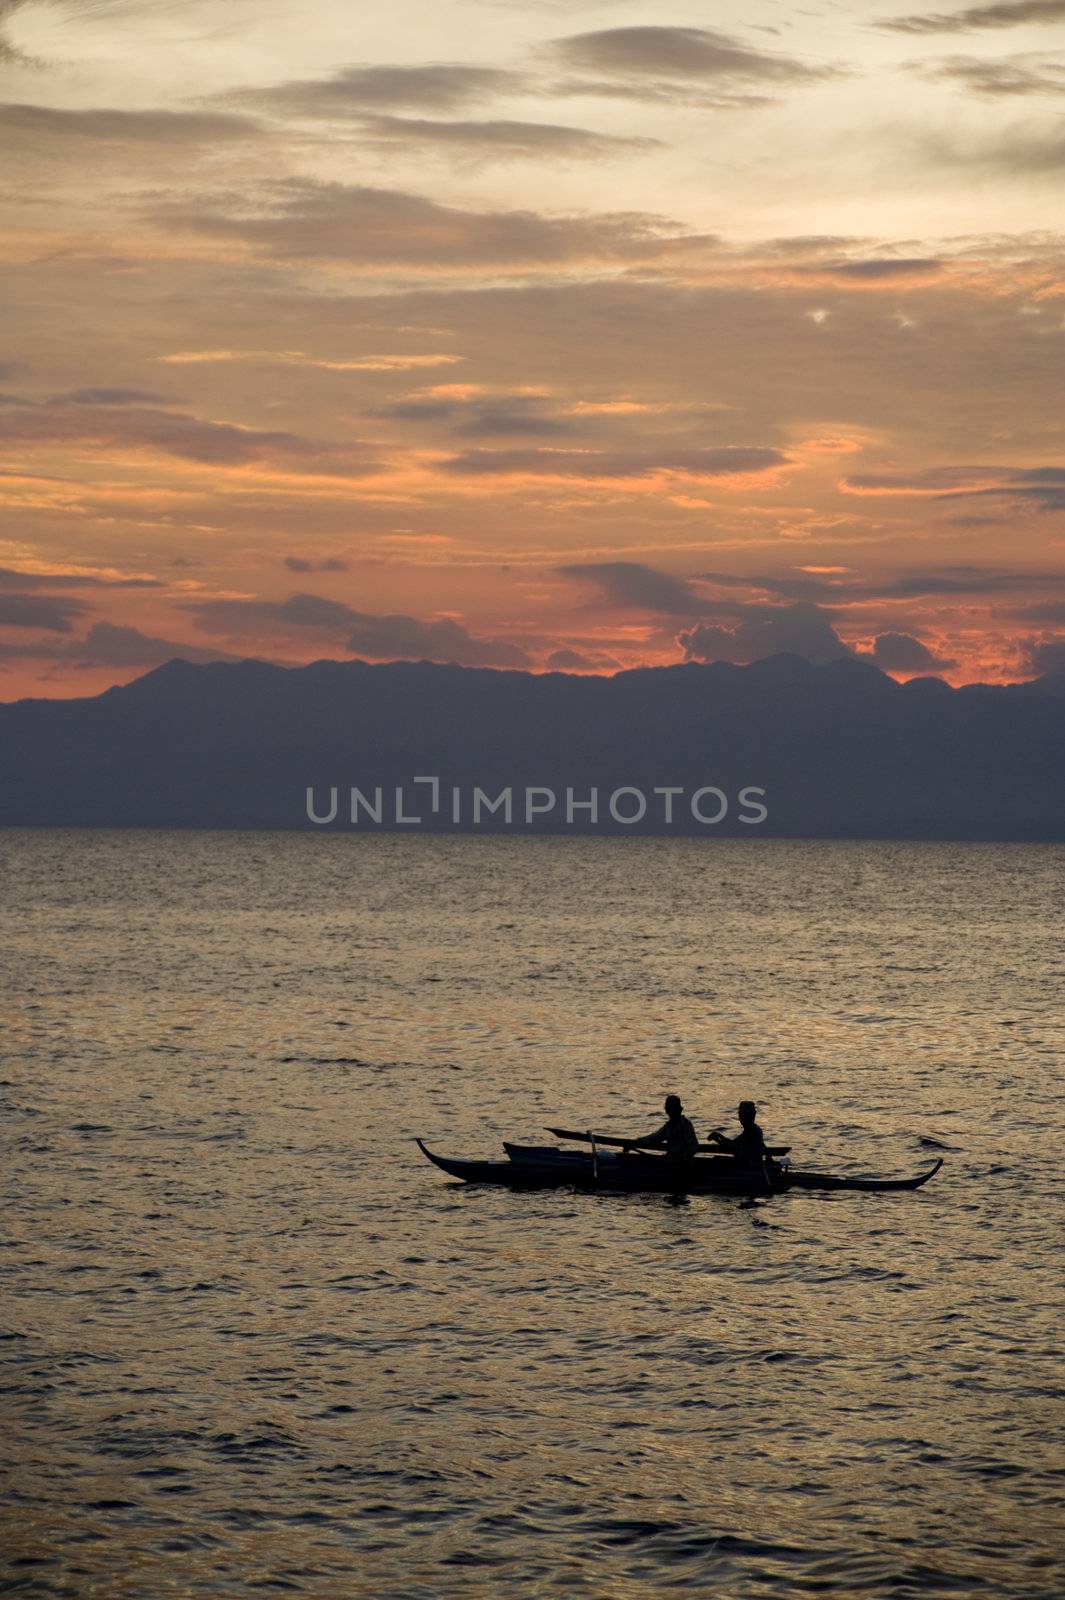 Local Philipino fisherman return to port after a long day.